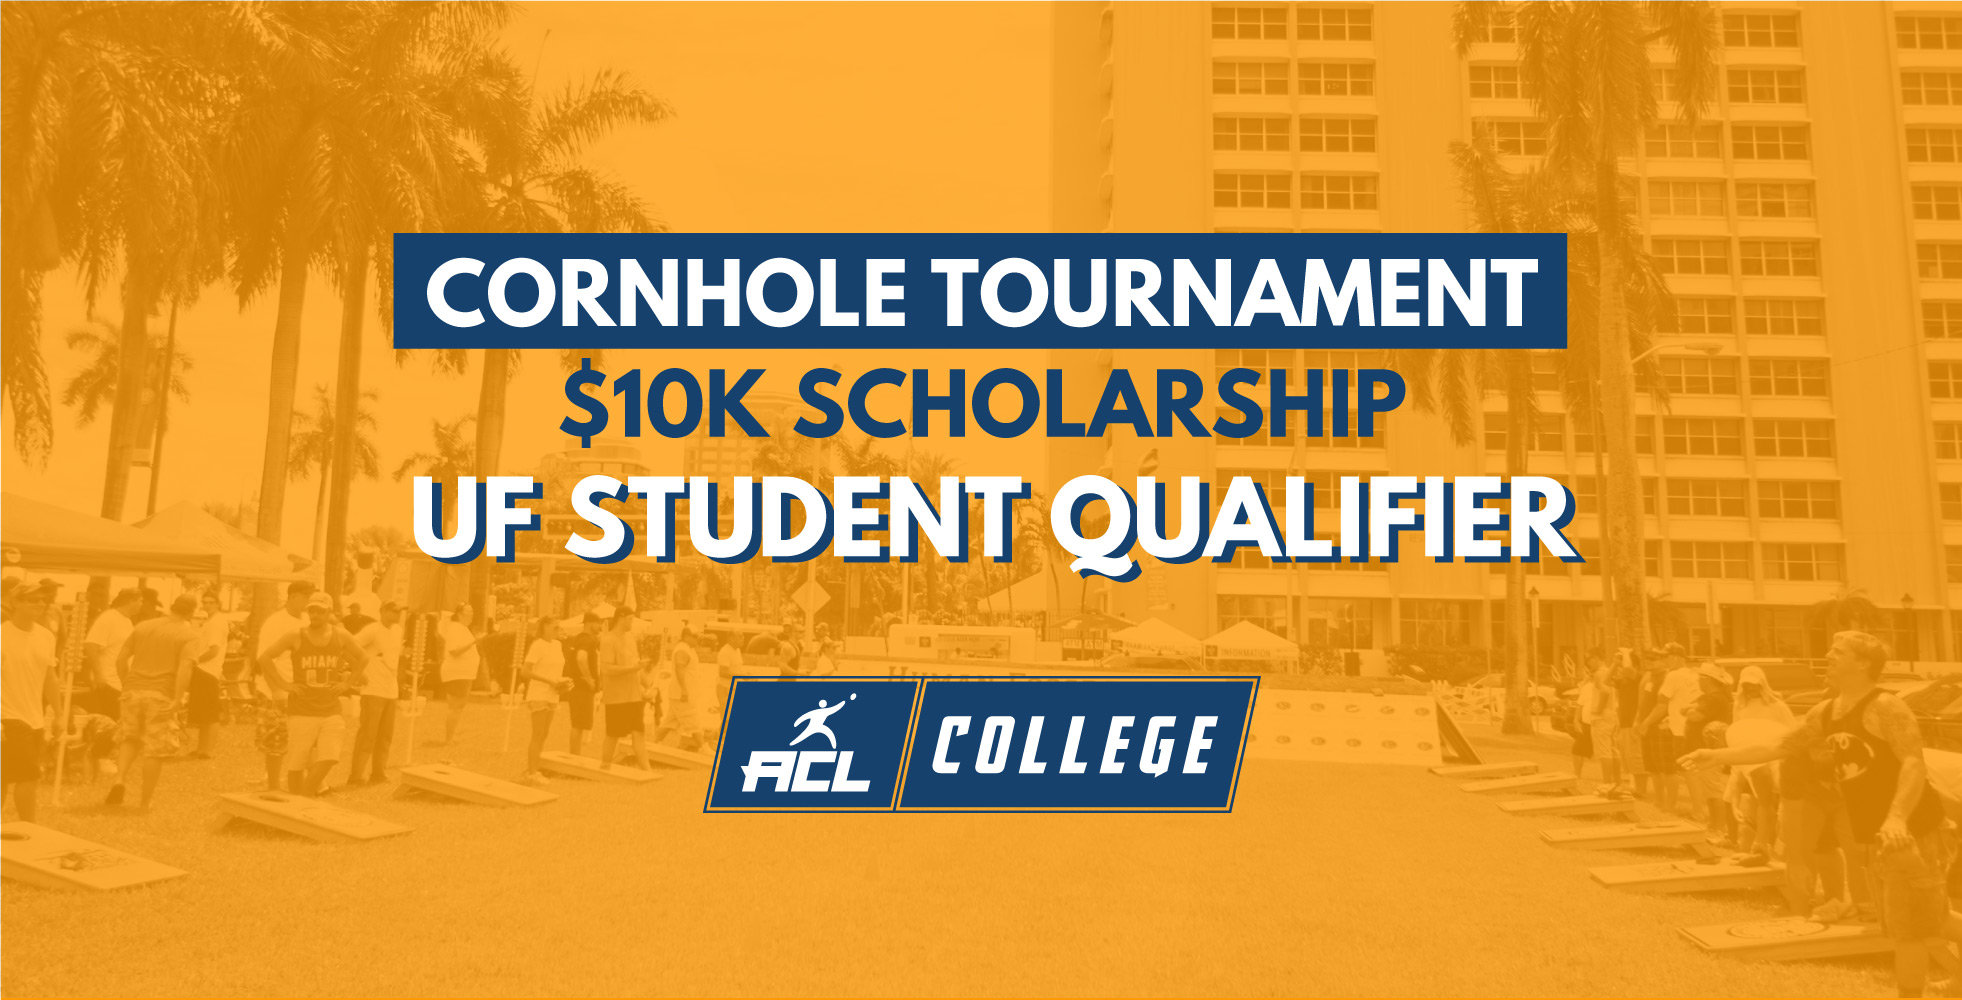 Board Men Cornhole To Host $10K Scholarship UF Student Qualifier Nov. 8th In Gainesville At The Ironwood Golf Course